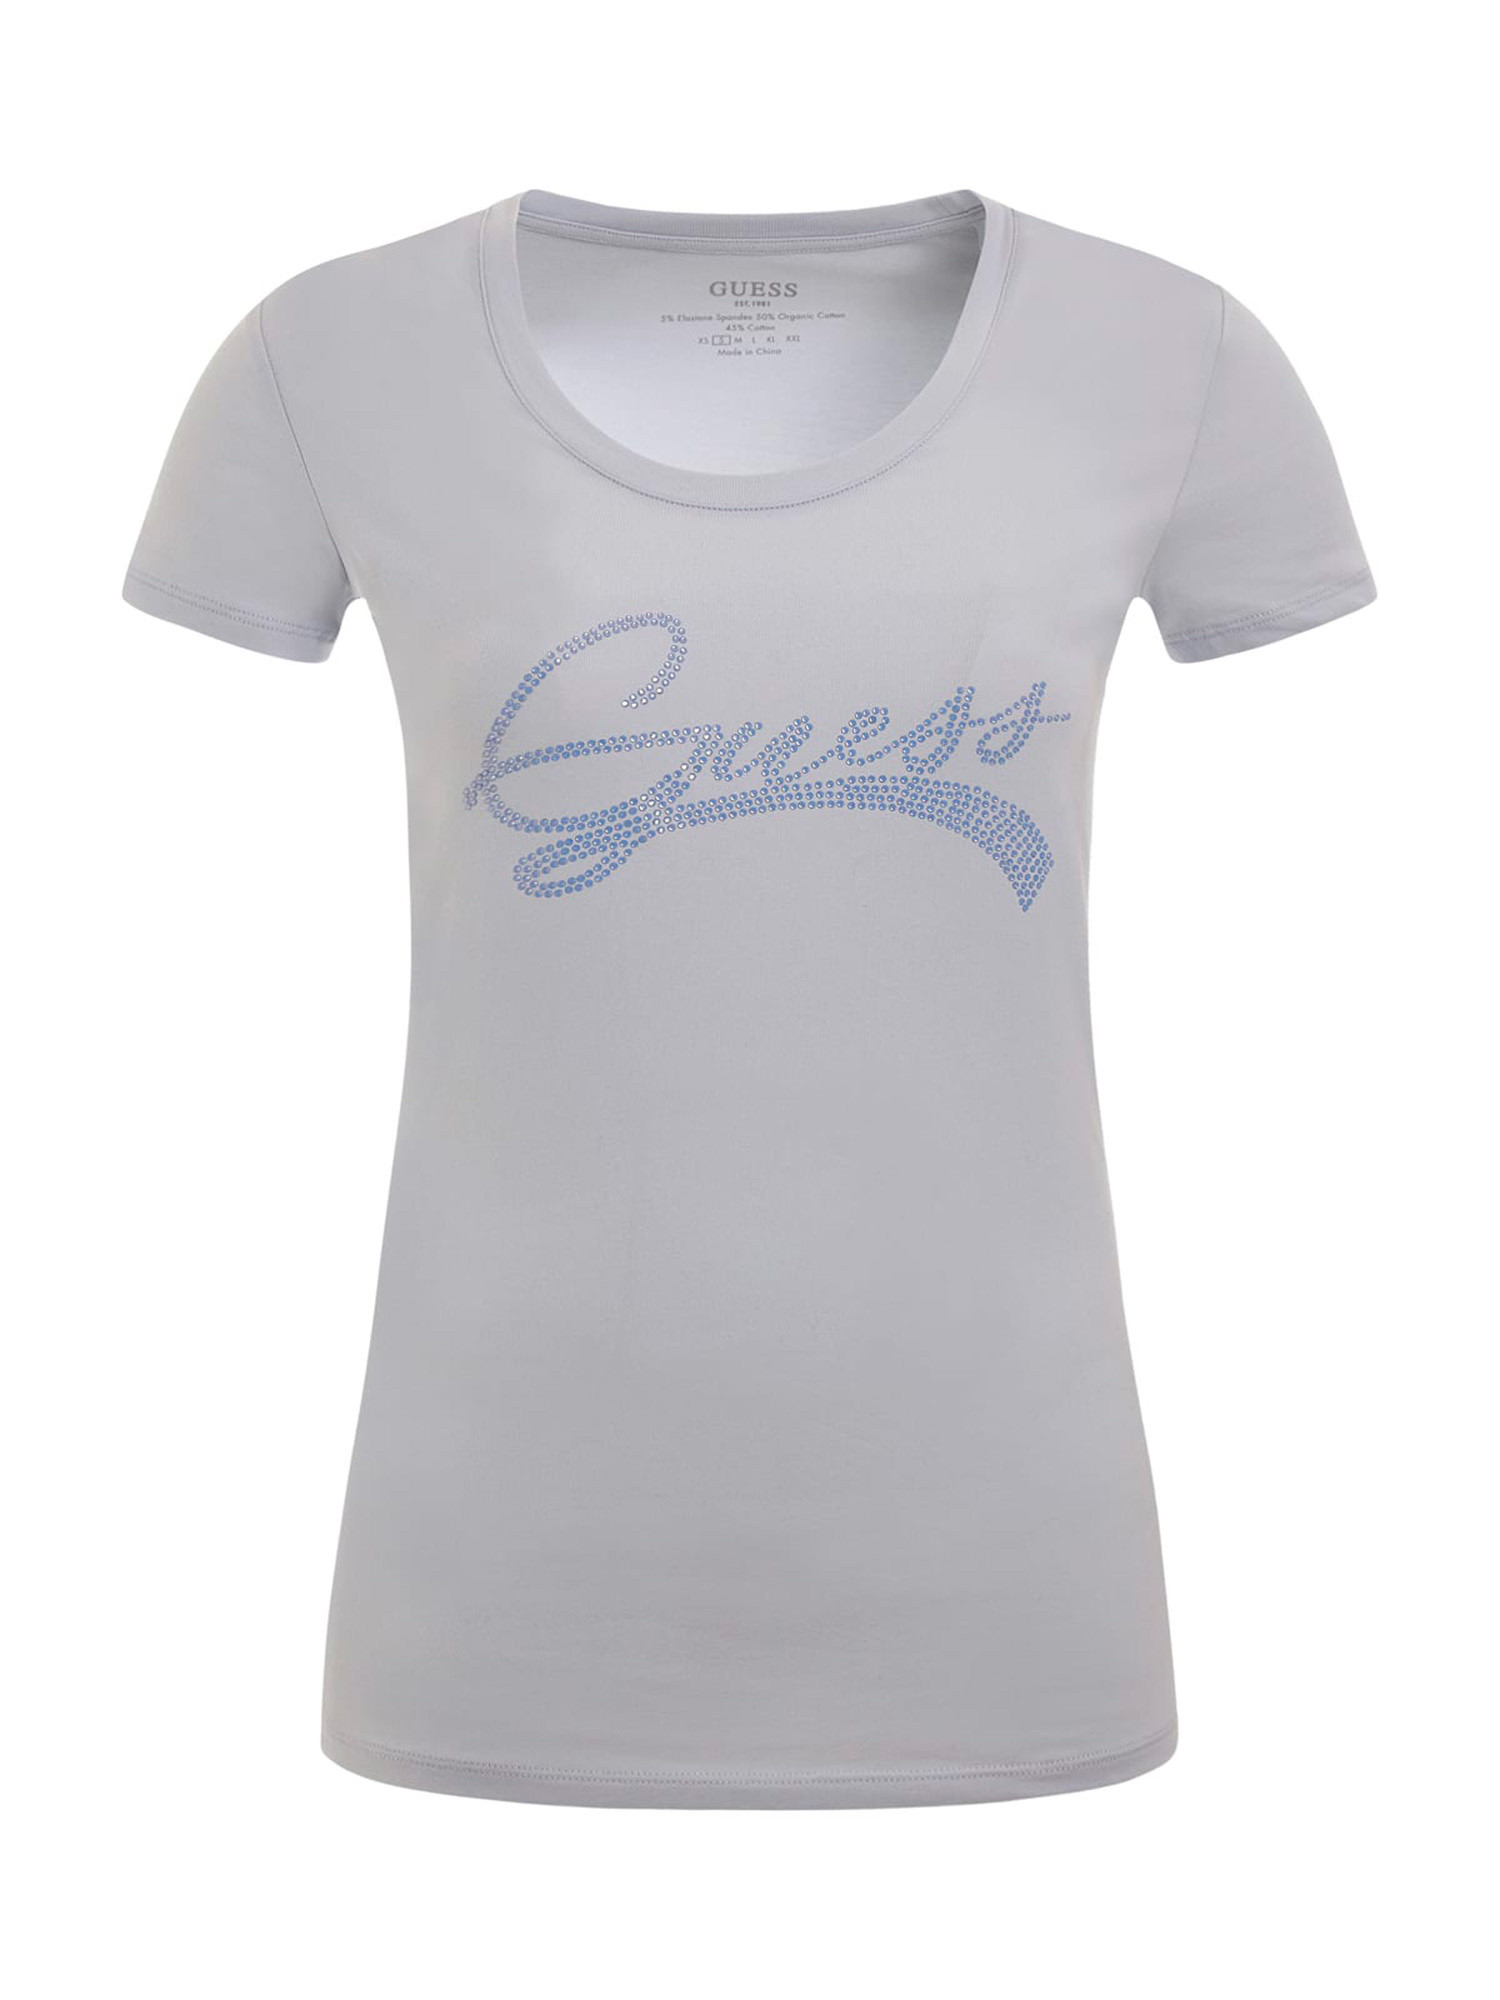 Guess - T-shirt con logo con strass slim fit, Bianco, large image number 0